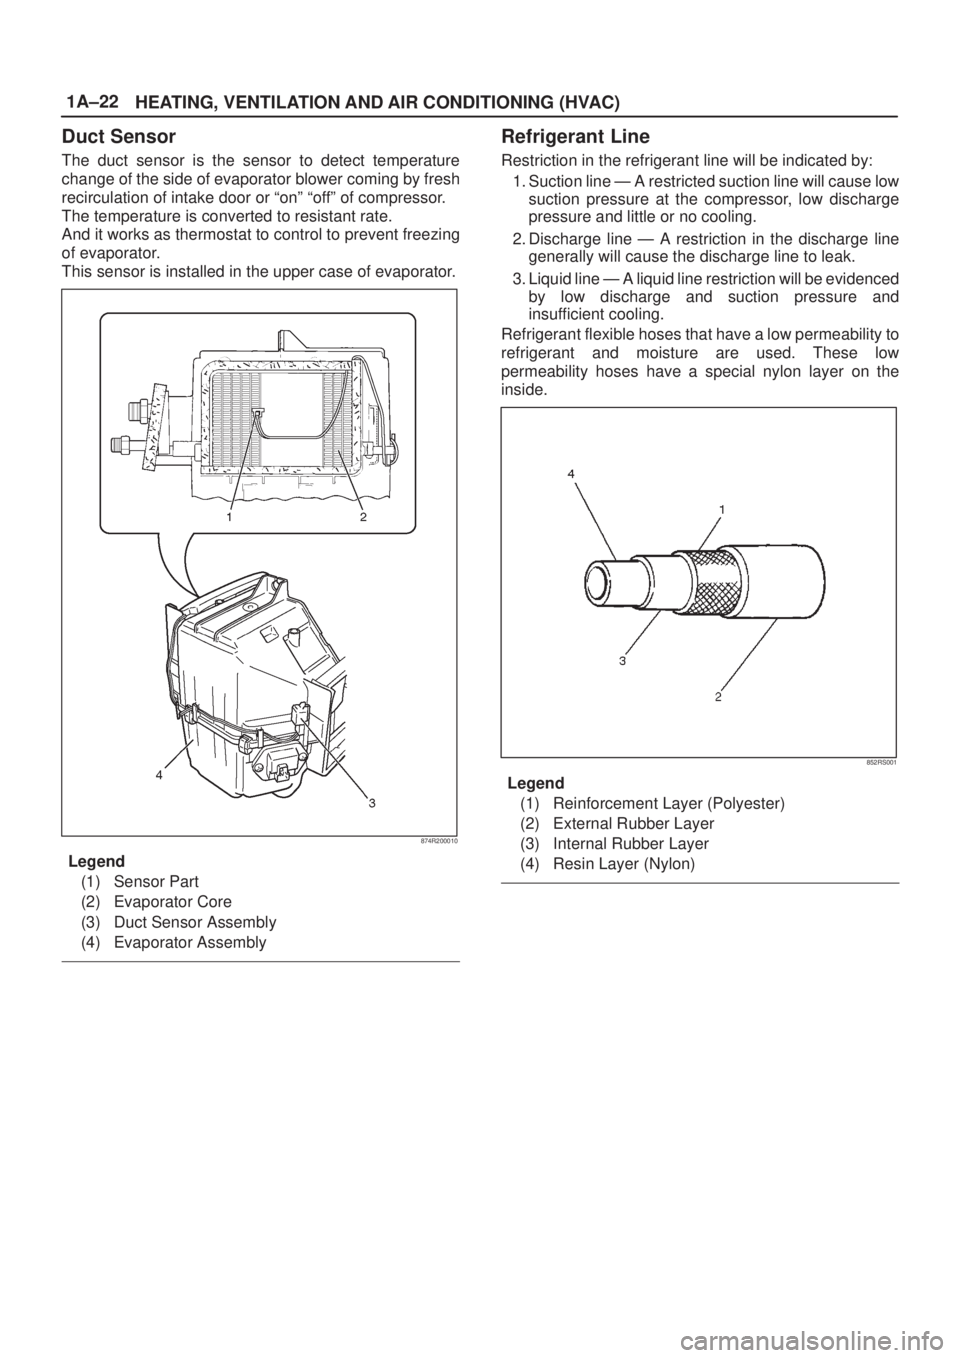 ISUZU AXIOM 2002  Service Service Manual 1A±22
HEATING, VENTILATION AND AIR CONDITIONING (HVAC)
Duct Sensor
The duct sensor is the sensor to detect temperature
change of the side of evaporator blower coming by fresh
recirculation of intake 